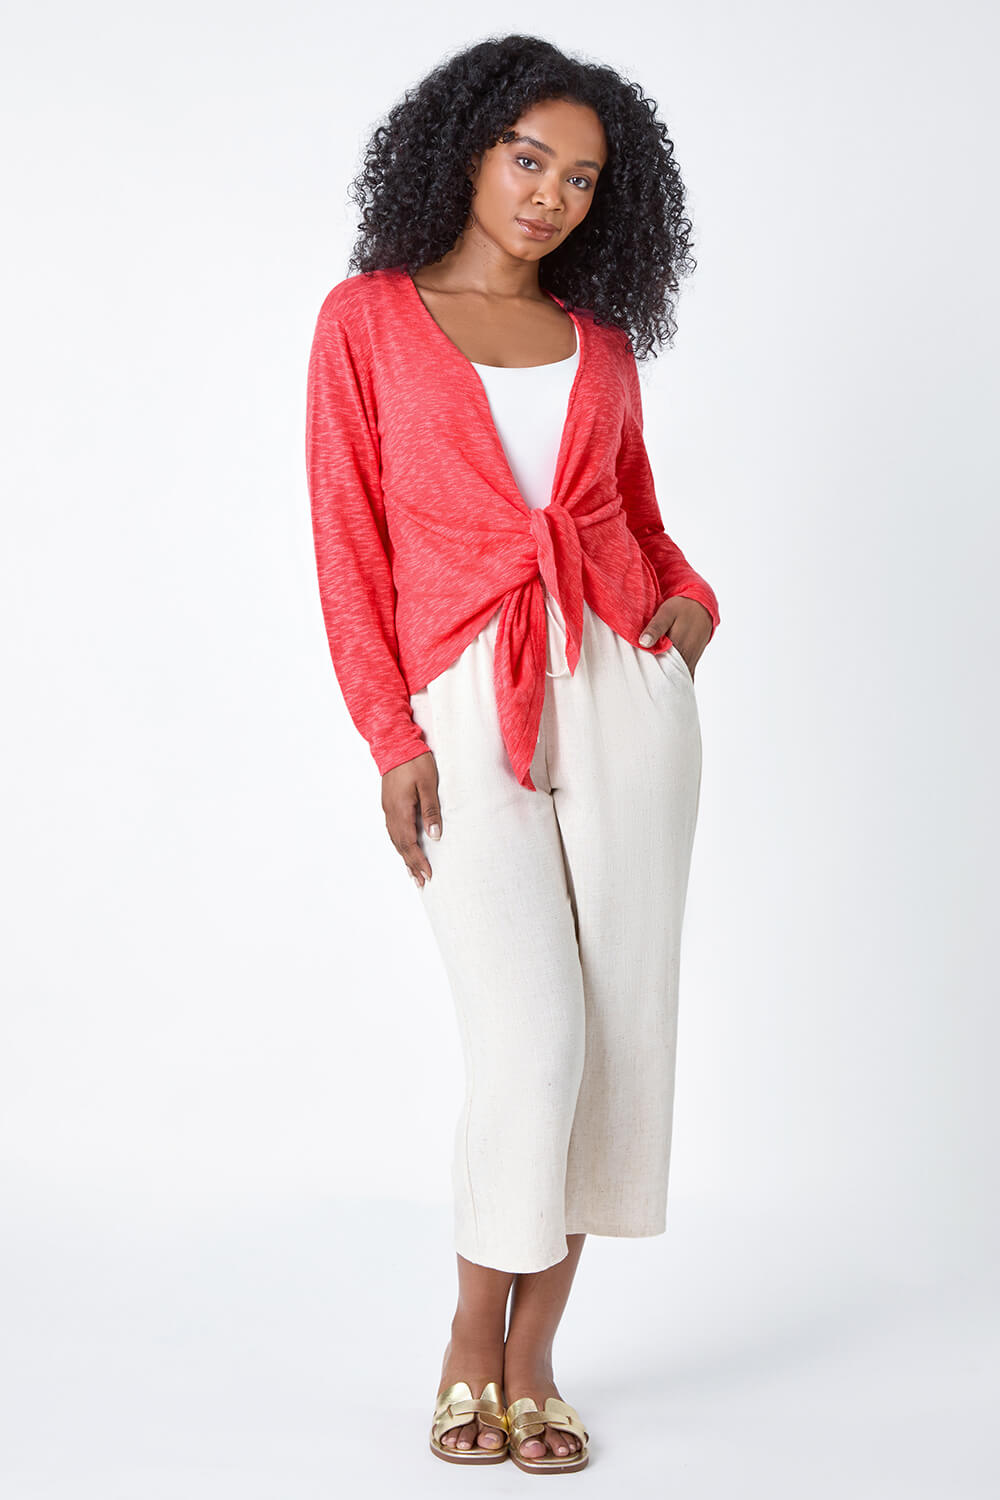 CORAL Petite Waterfall Front Cotton Knit Cardigan, Image 2 of 5